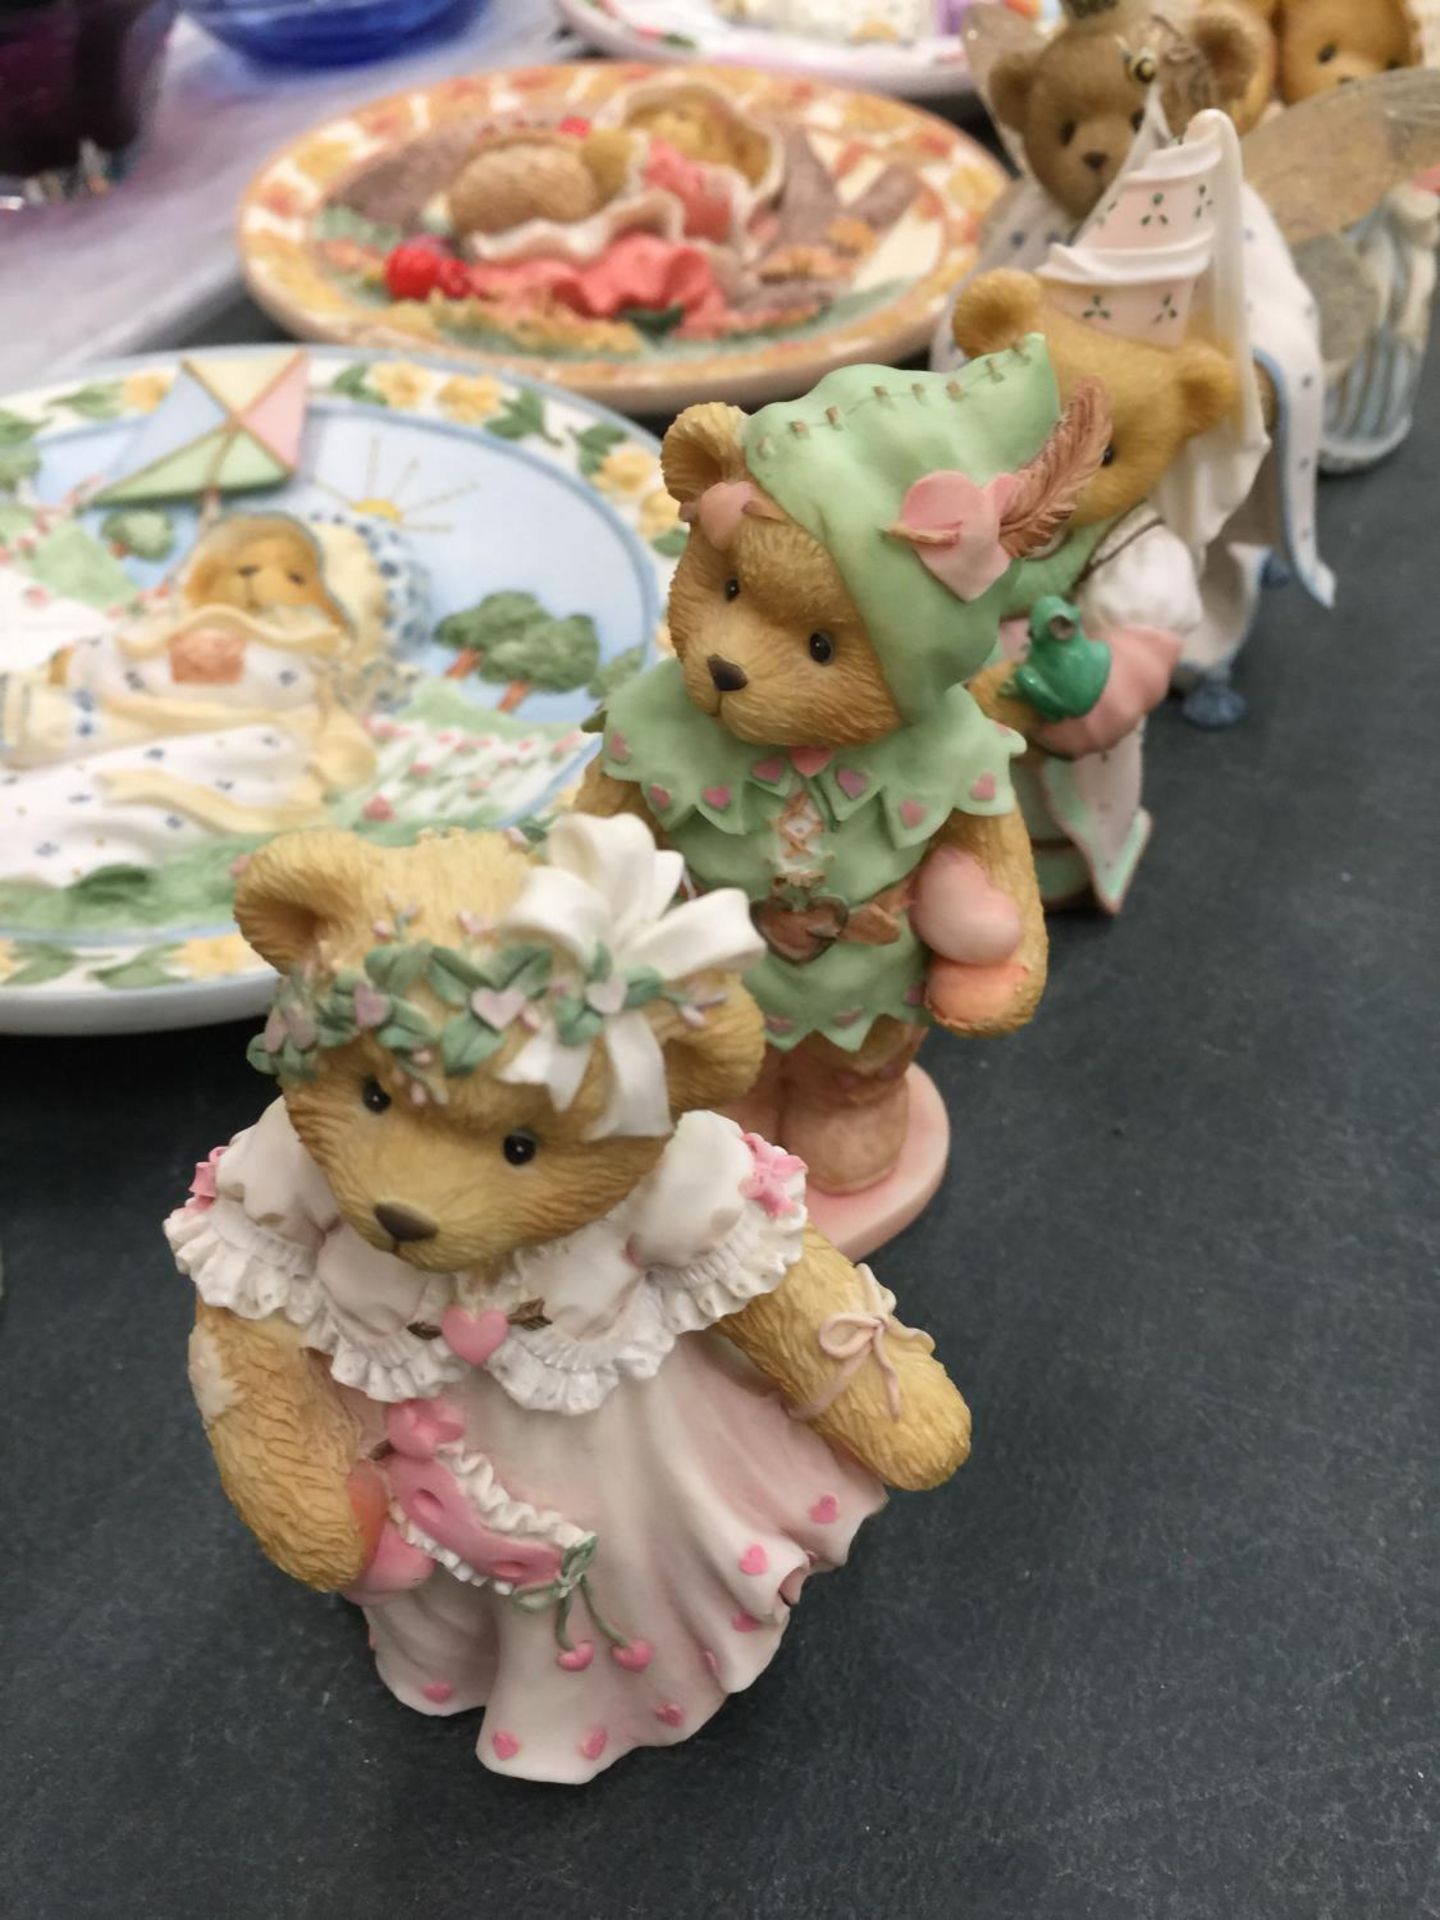 ELEVEN LIMITED EDITION CHERISHED TEDDIES PLUS FOUR CHERISHED TEDDIES LIMITED EDITION WALL PLATES - Image 6 of 6